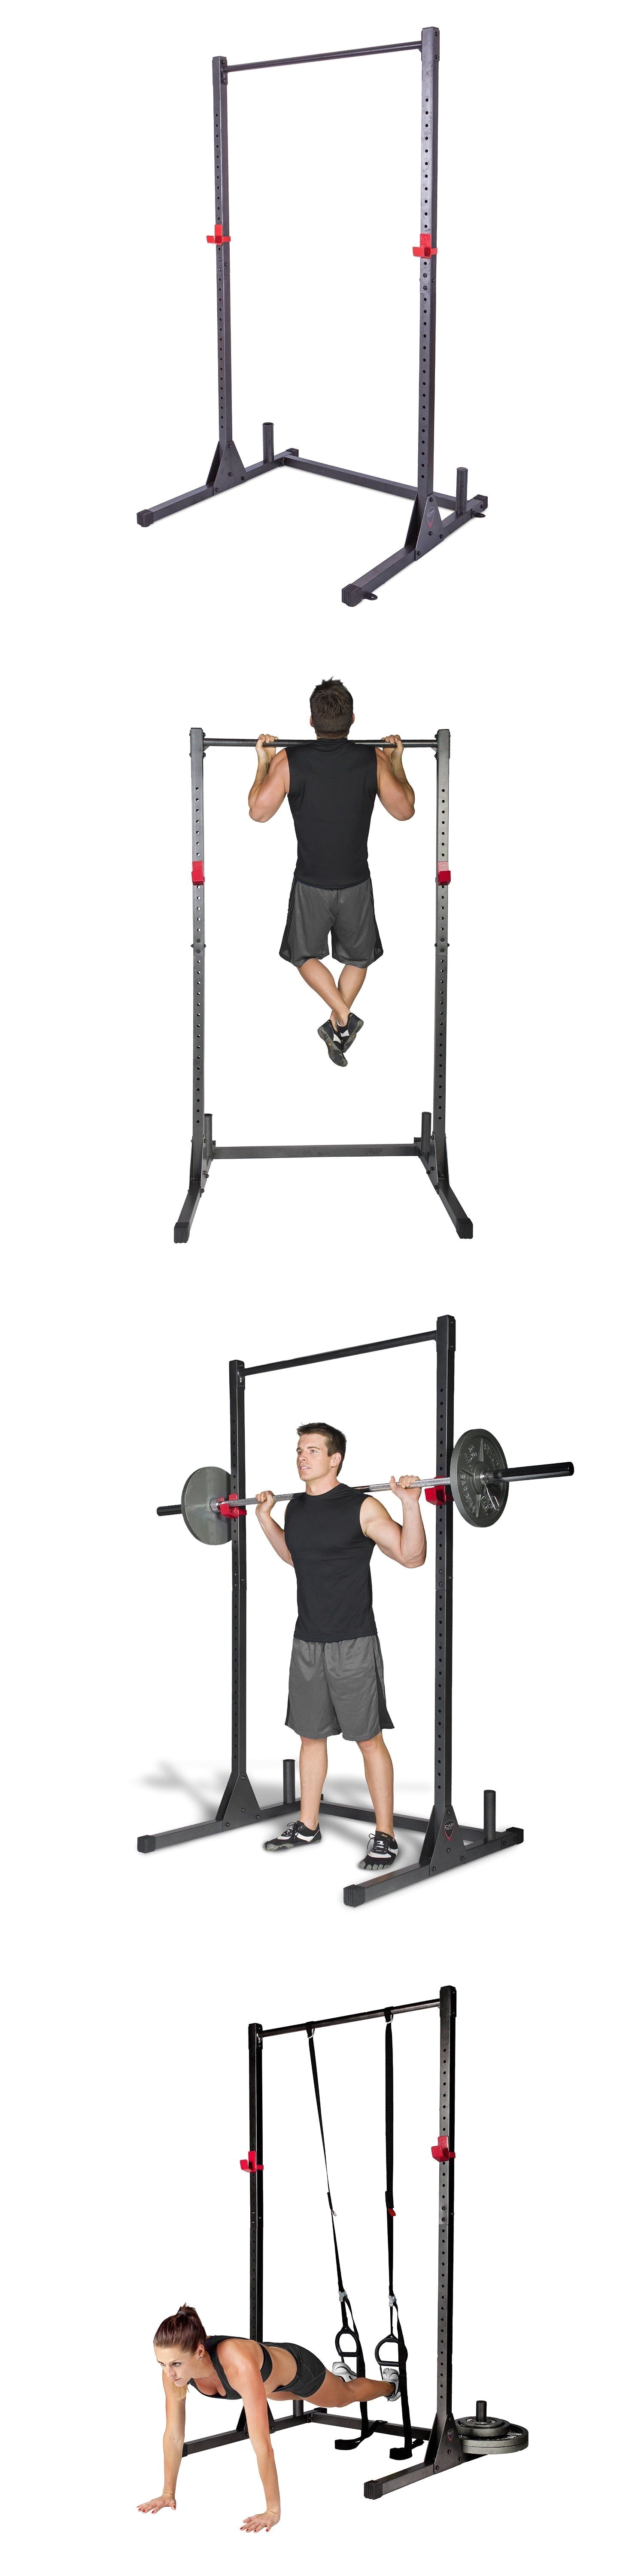 titan squat stand with safety arms pull up bar free standing pull up bar pinterest squat stands and squat